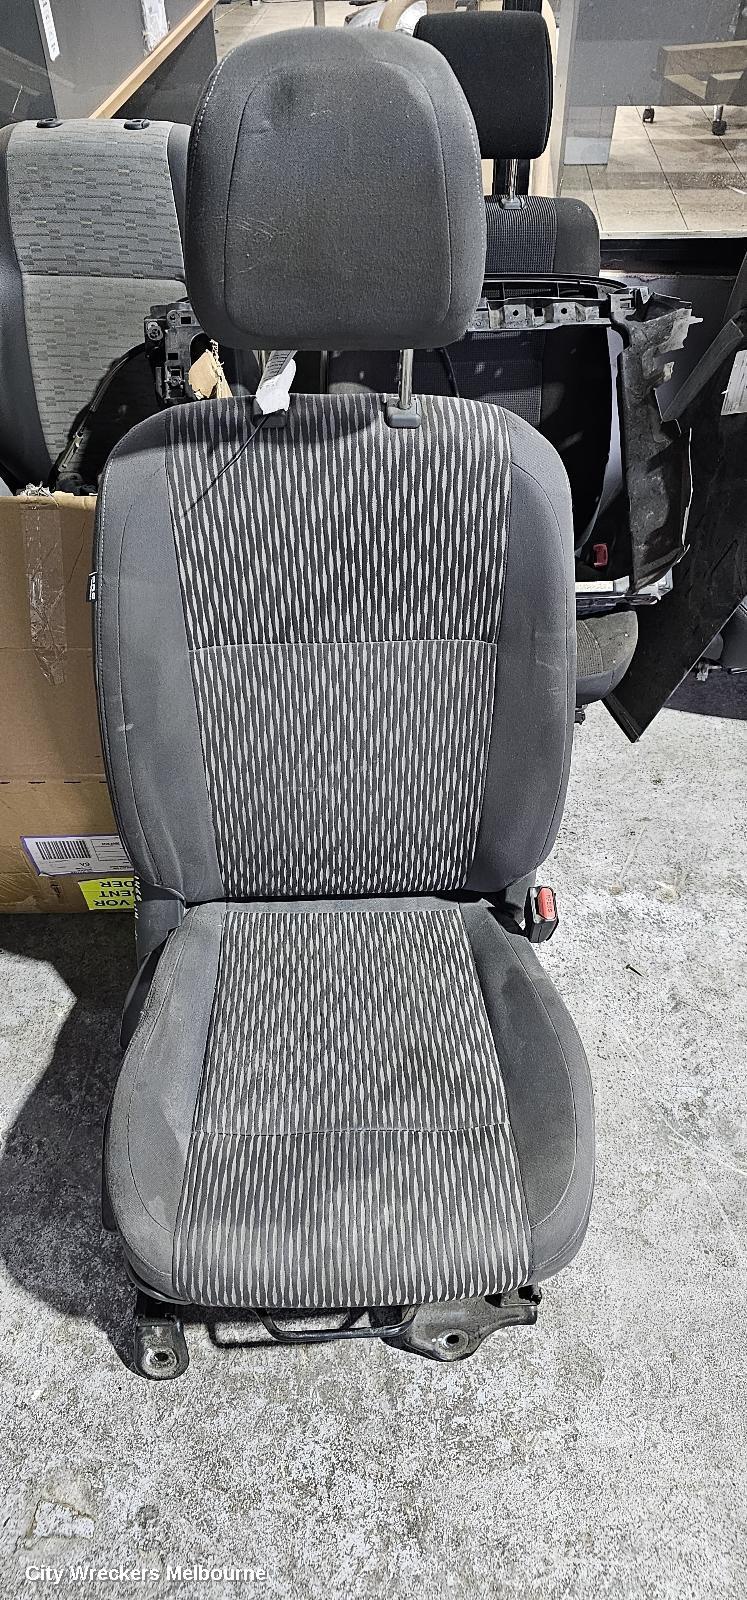 HOLDEN COLORADO 2014 Front Seat